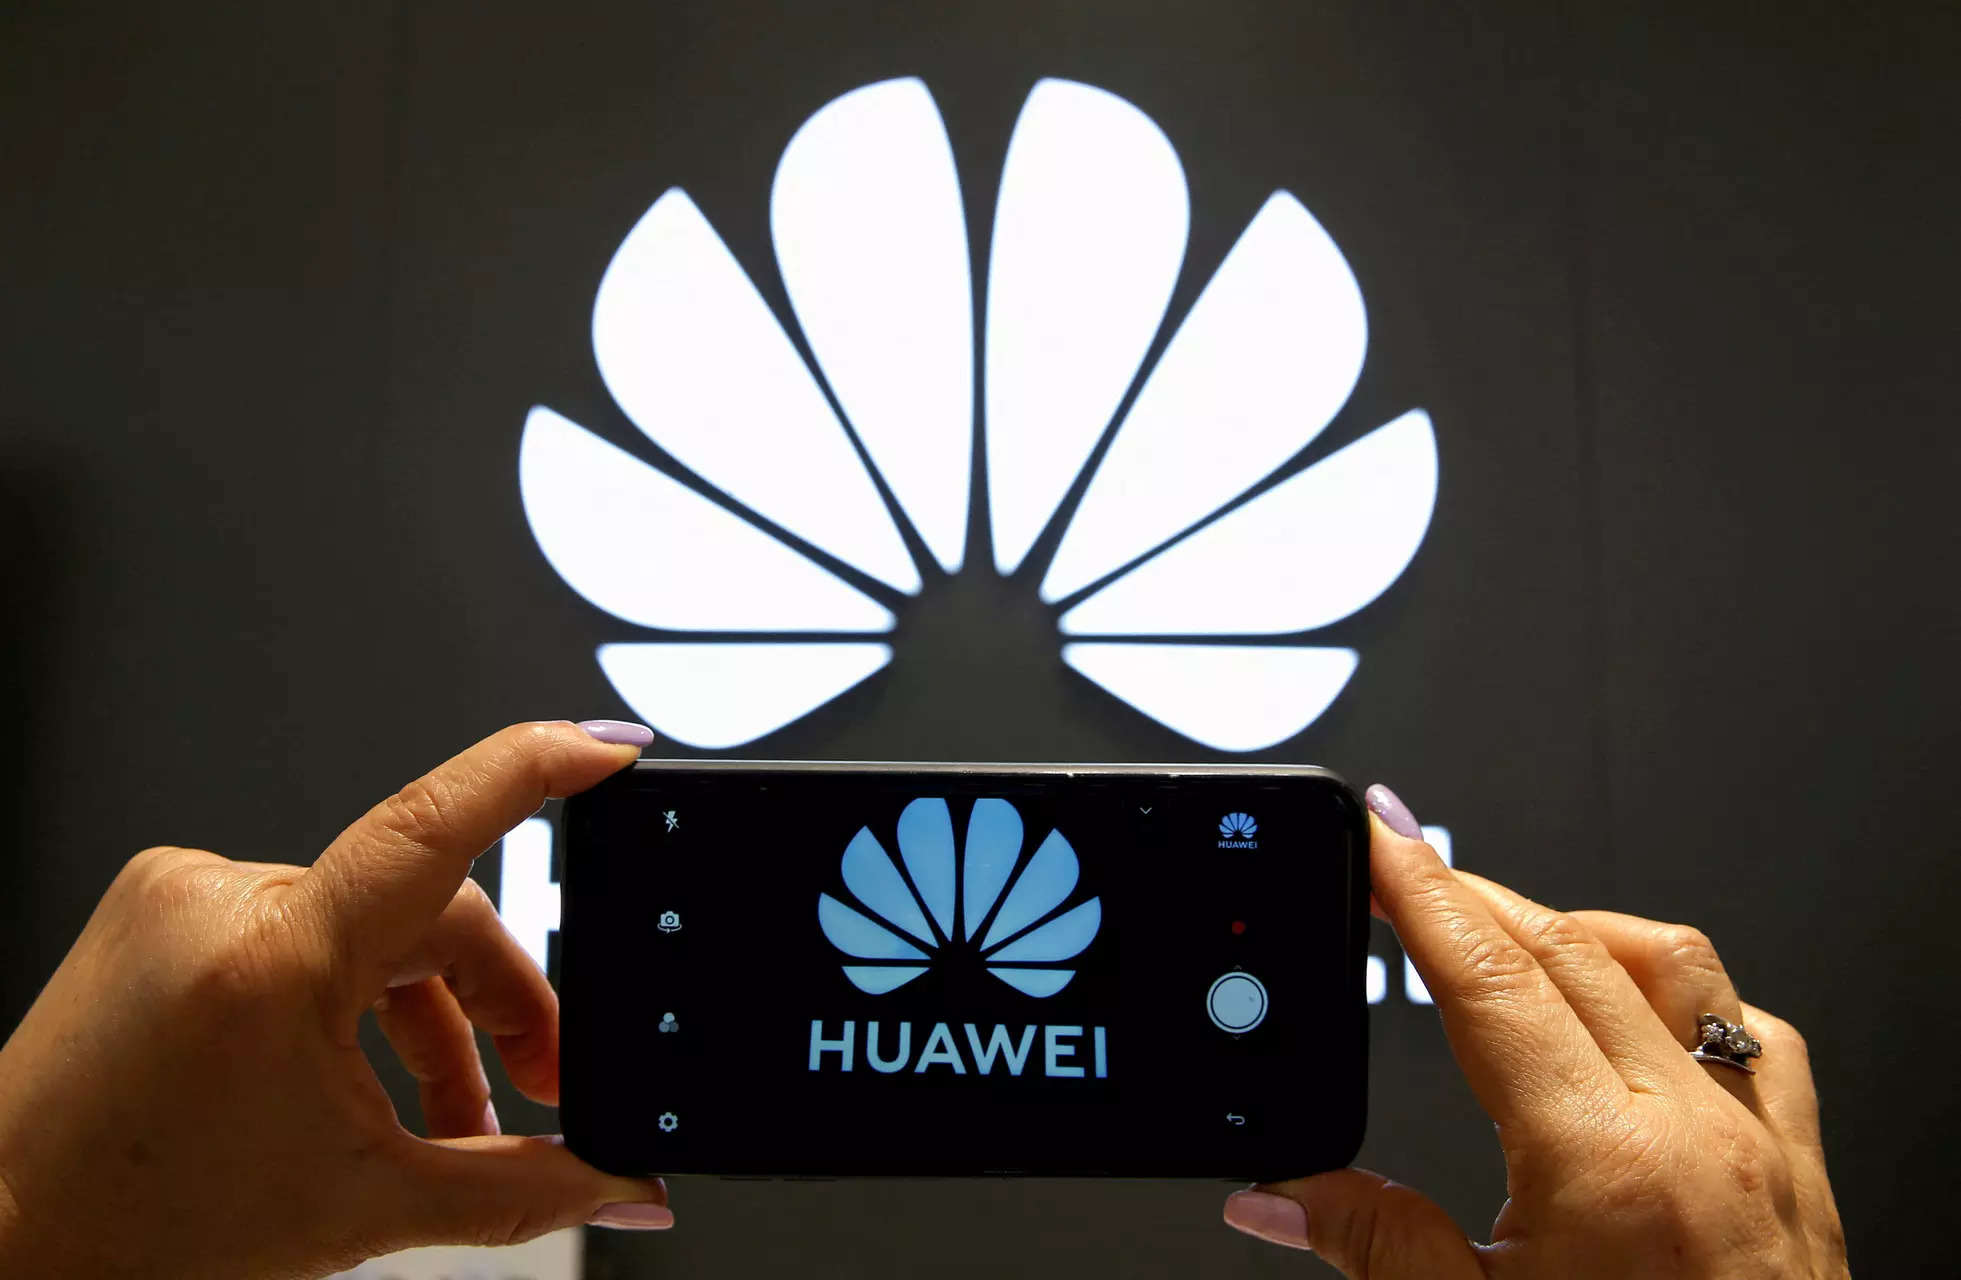 Huawei Phone Shows China Is Replacing US Suppliers of 5G Tech - Bloomberg